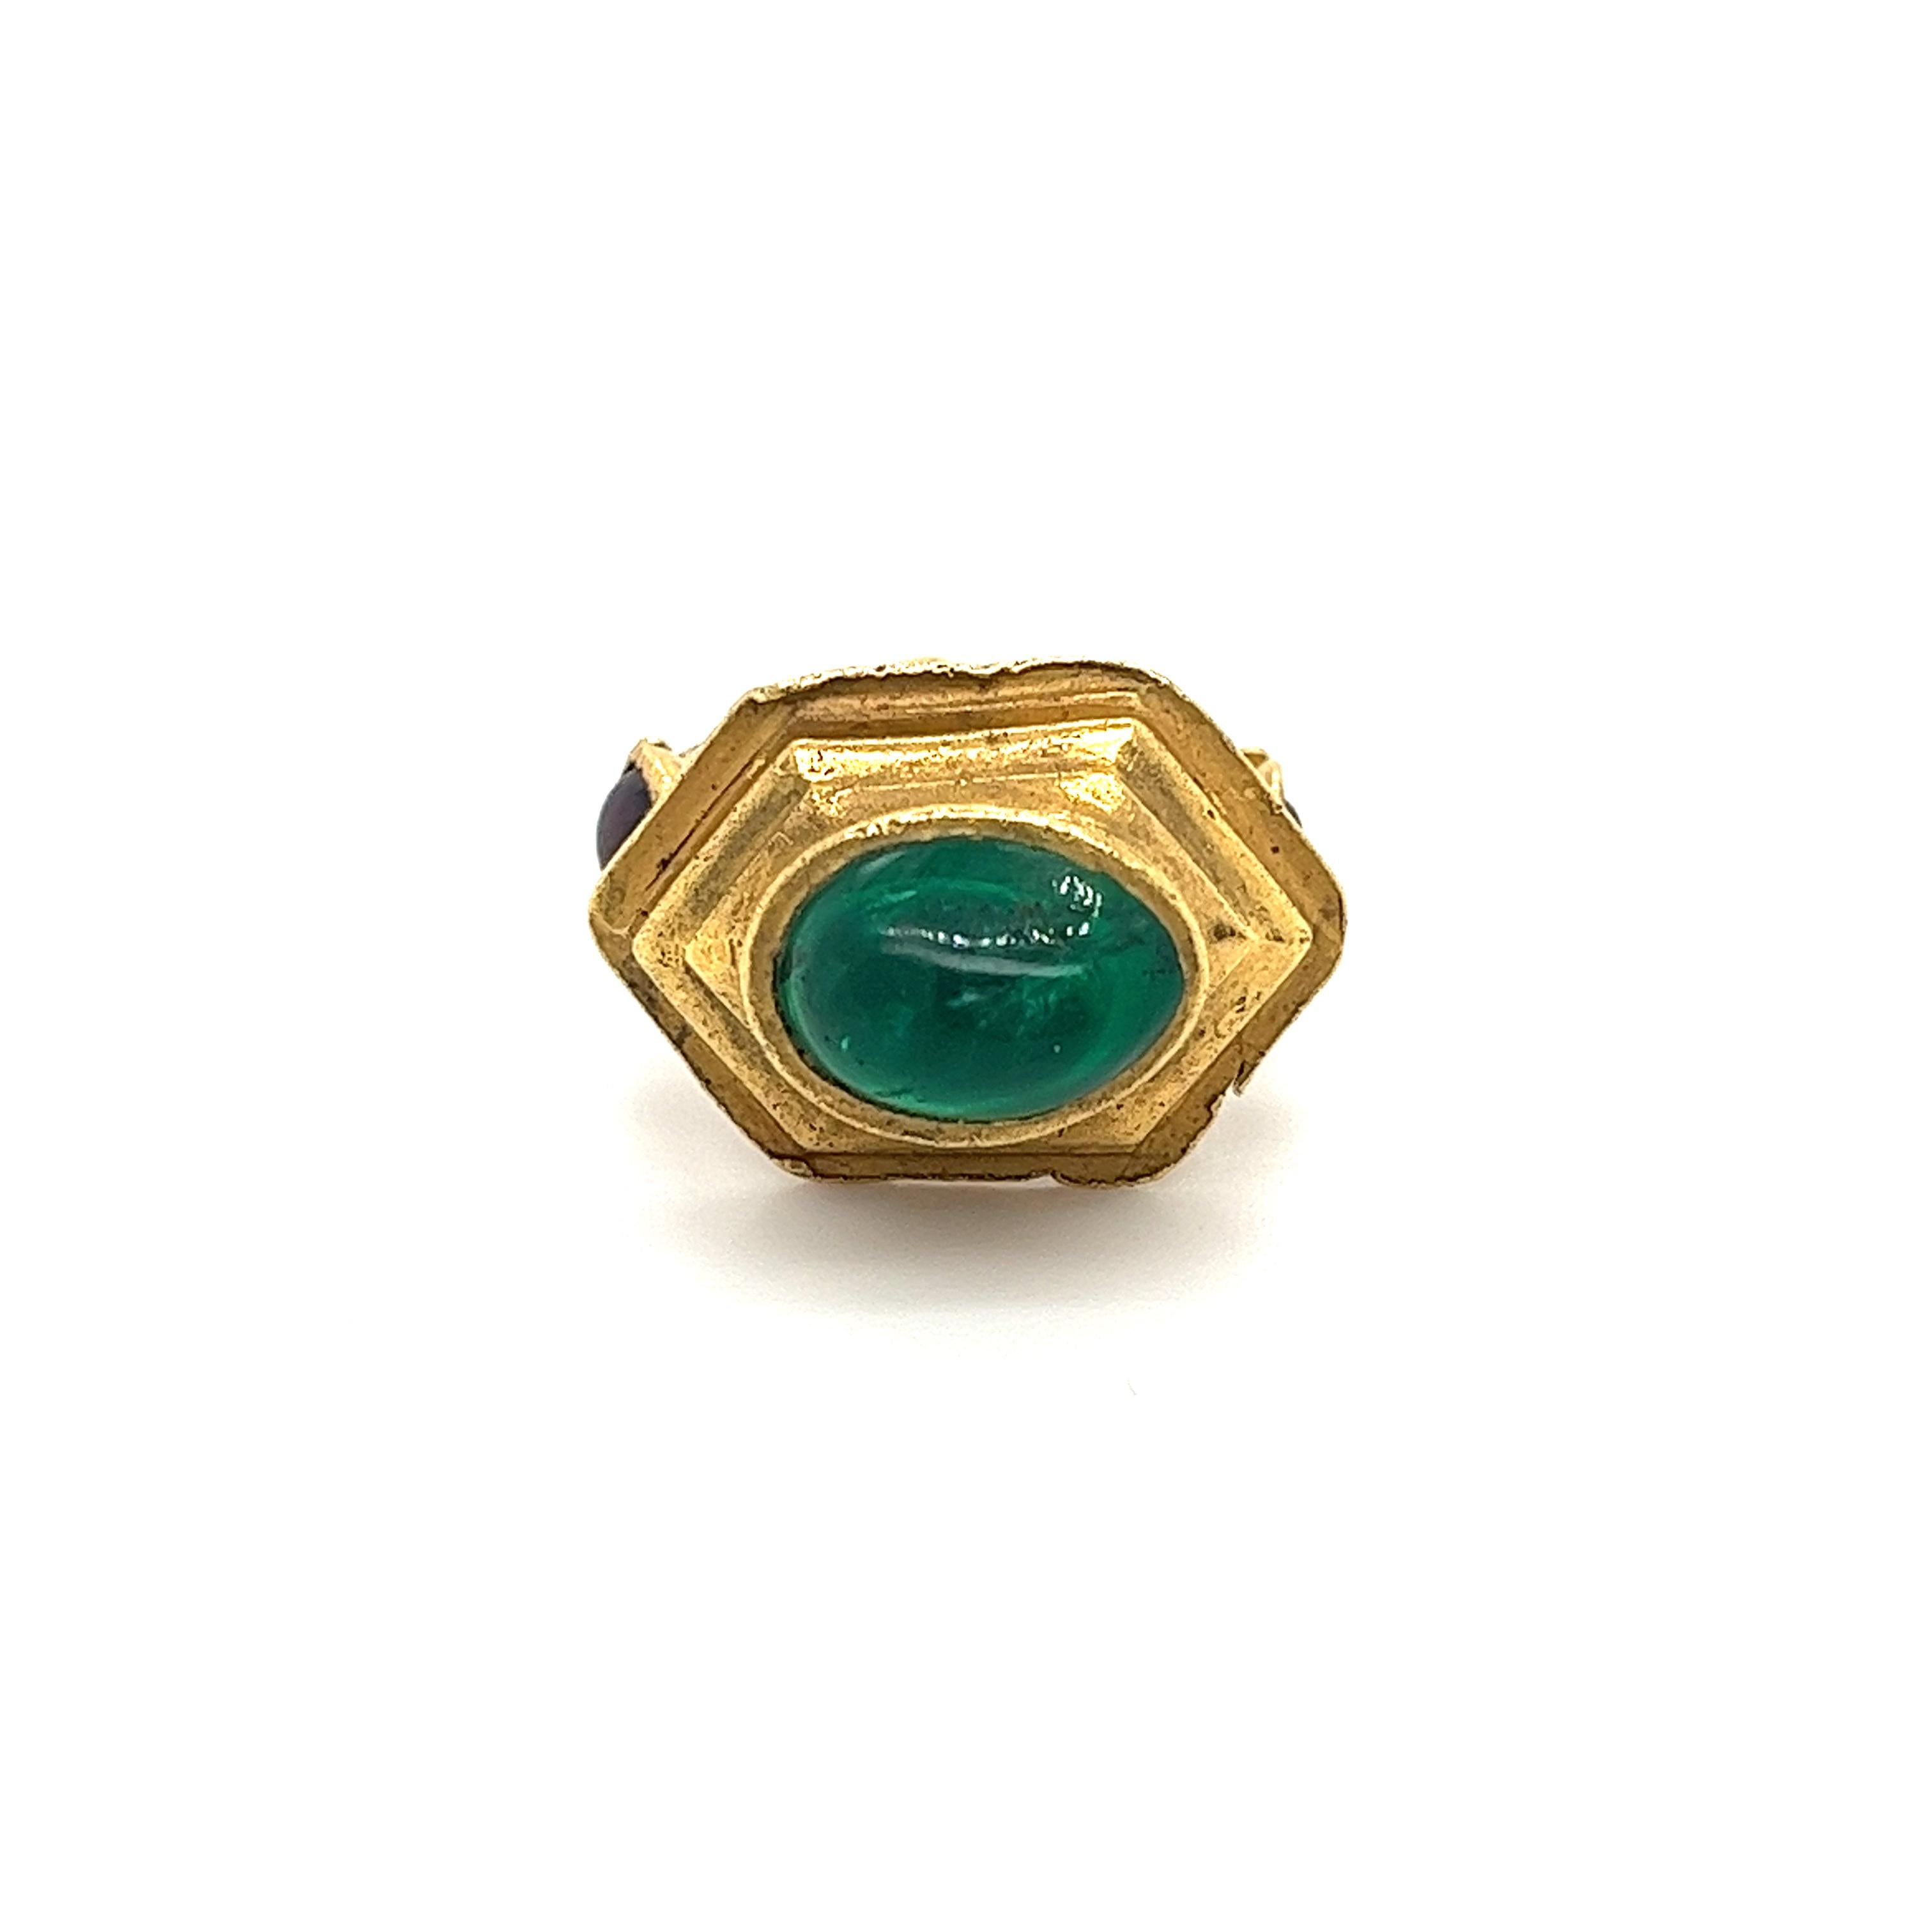 This Egyptian revival ring mounts a 3-carat cabochon cut natural emerald, set in 22 karat solid gold. Featuring 2 cabochon cut garnet gemstones along the ring shank. The emerald displays a rich, vibrant natural green color. This piece is handmade